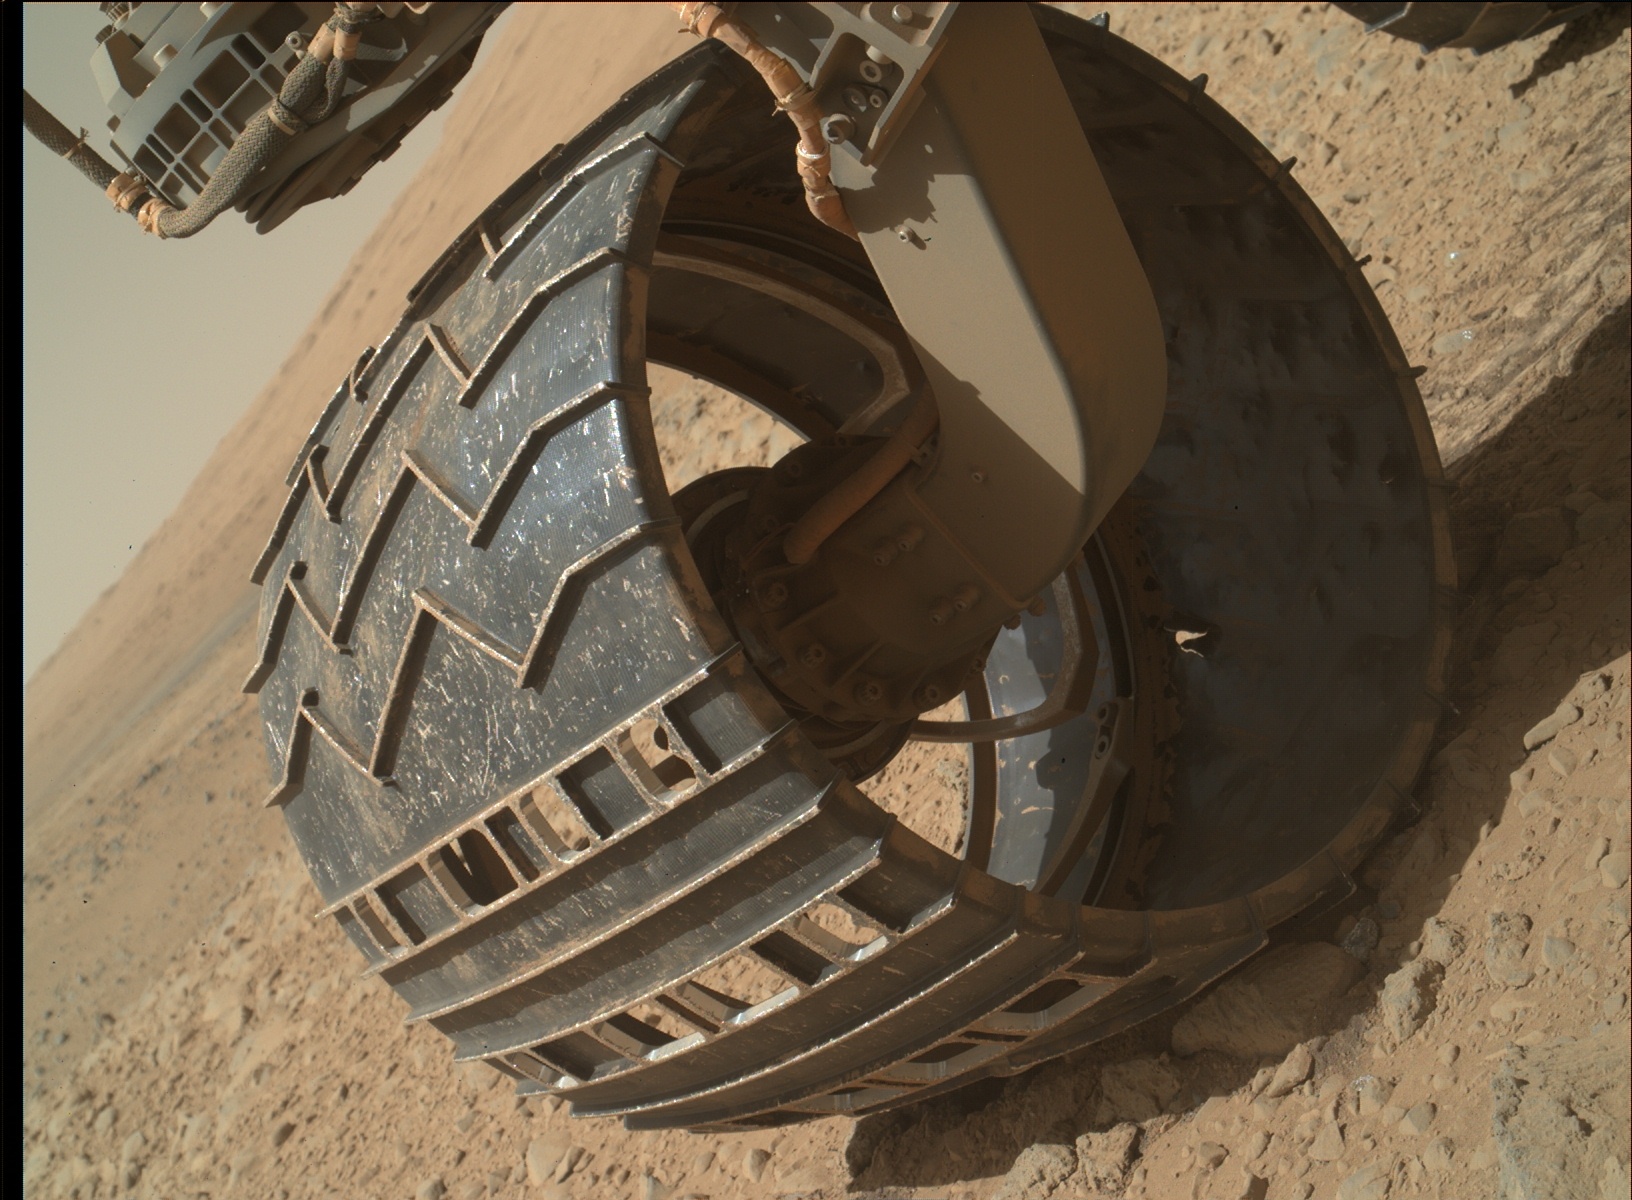 Nasa's Mars rover Curiosity acquired this image using its Mars Hand Lens Imager (MAHLI) on Sol 564